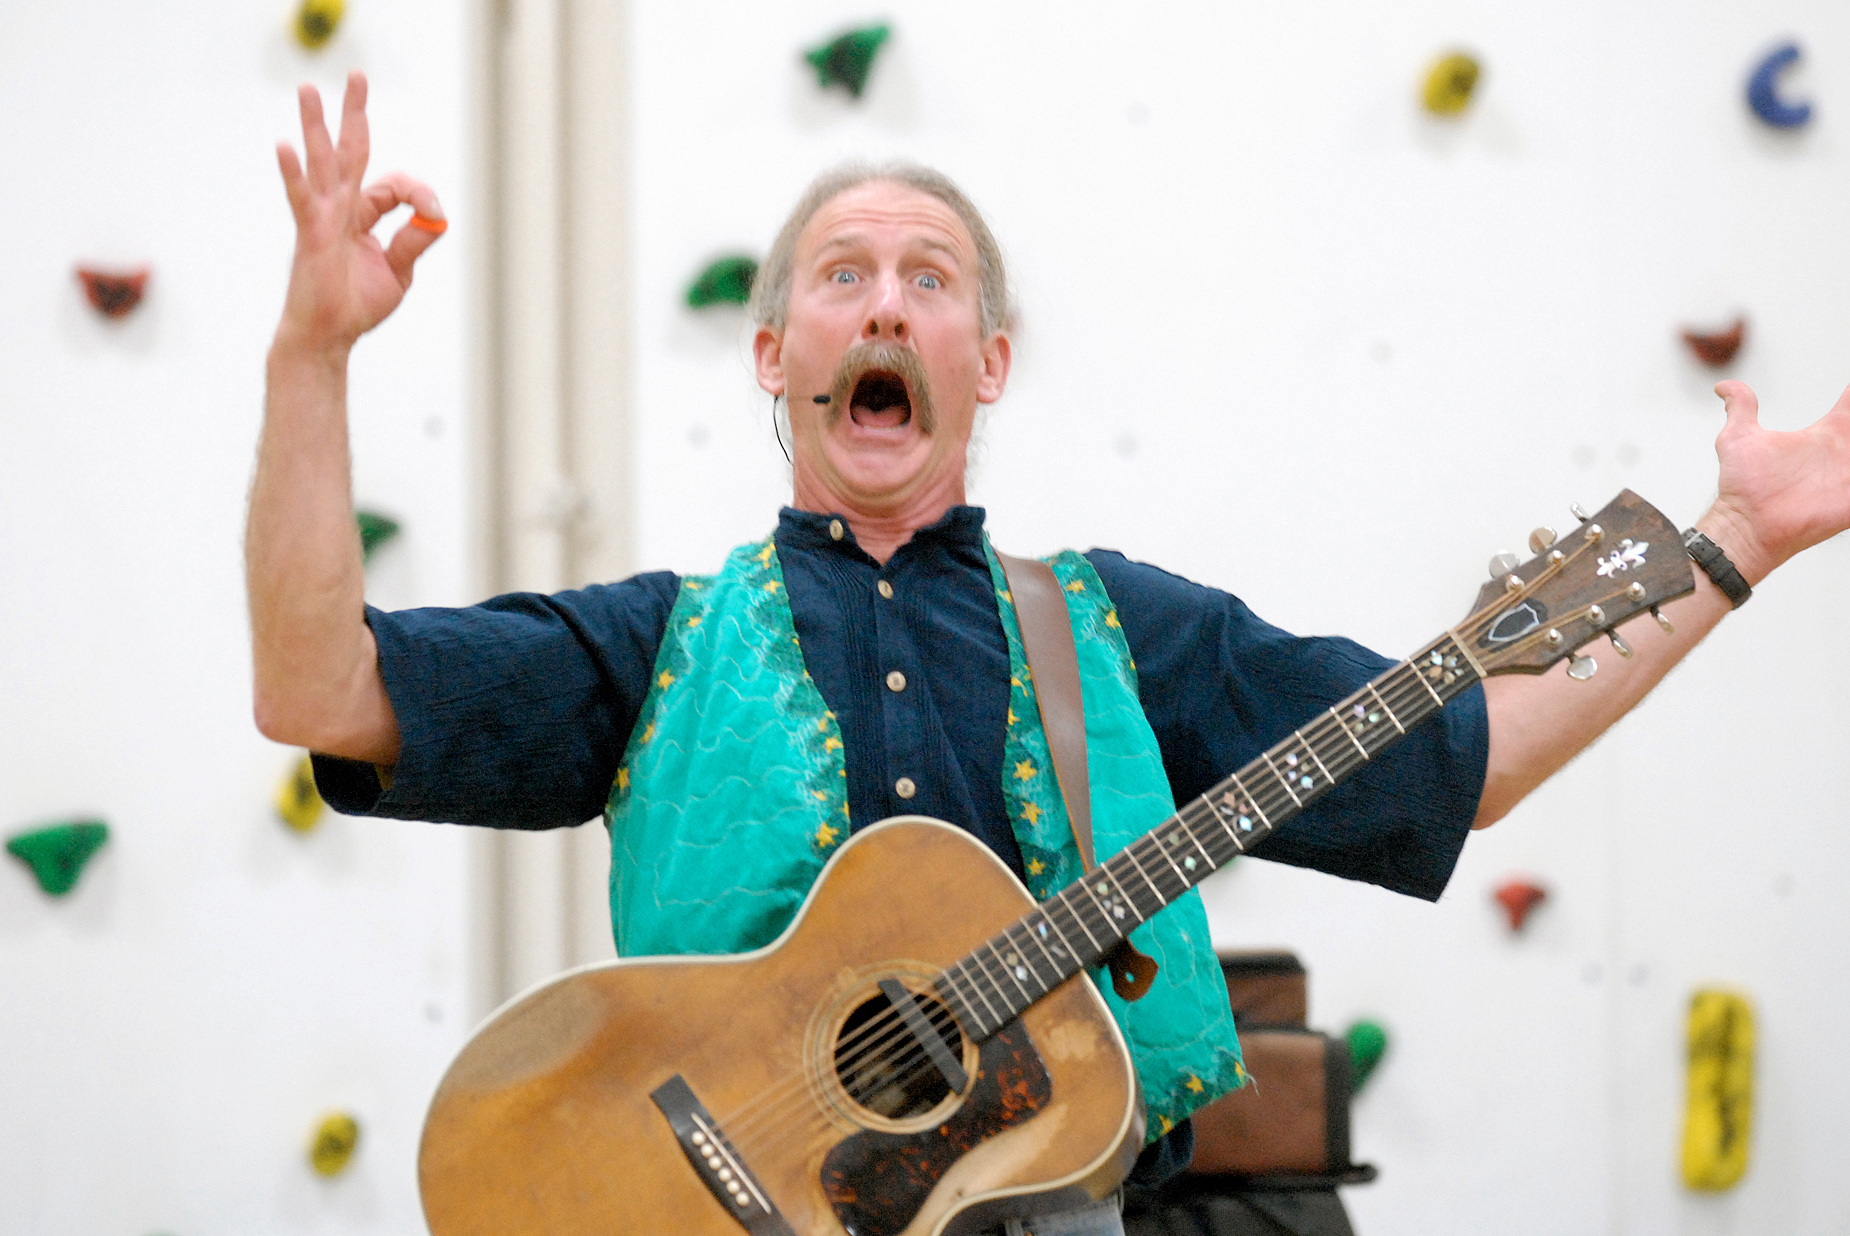 A man in a blue vest, wearing a guitar, makes an open-mouthed expression while raising his arms.